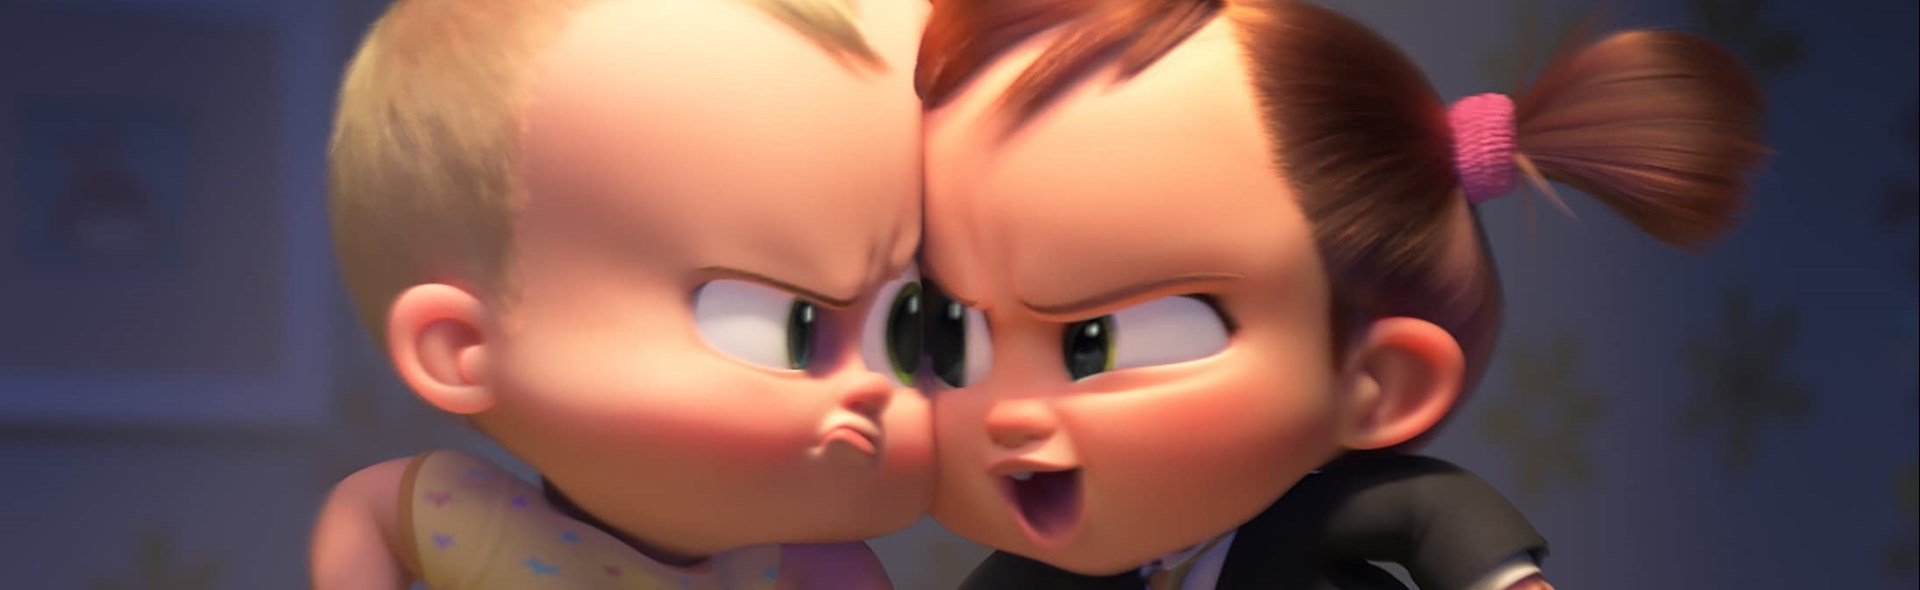 Boss Baby 2: Family Business